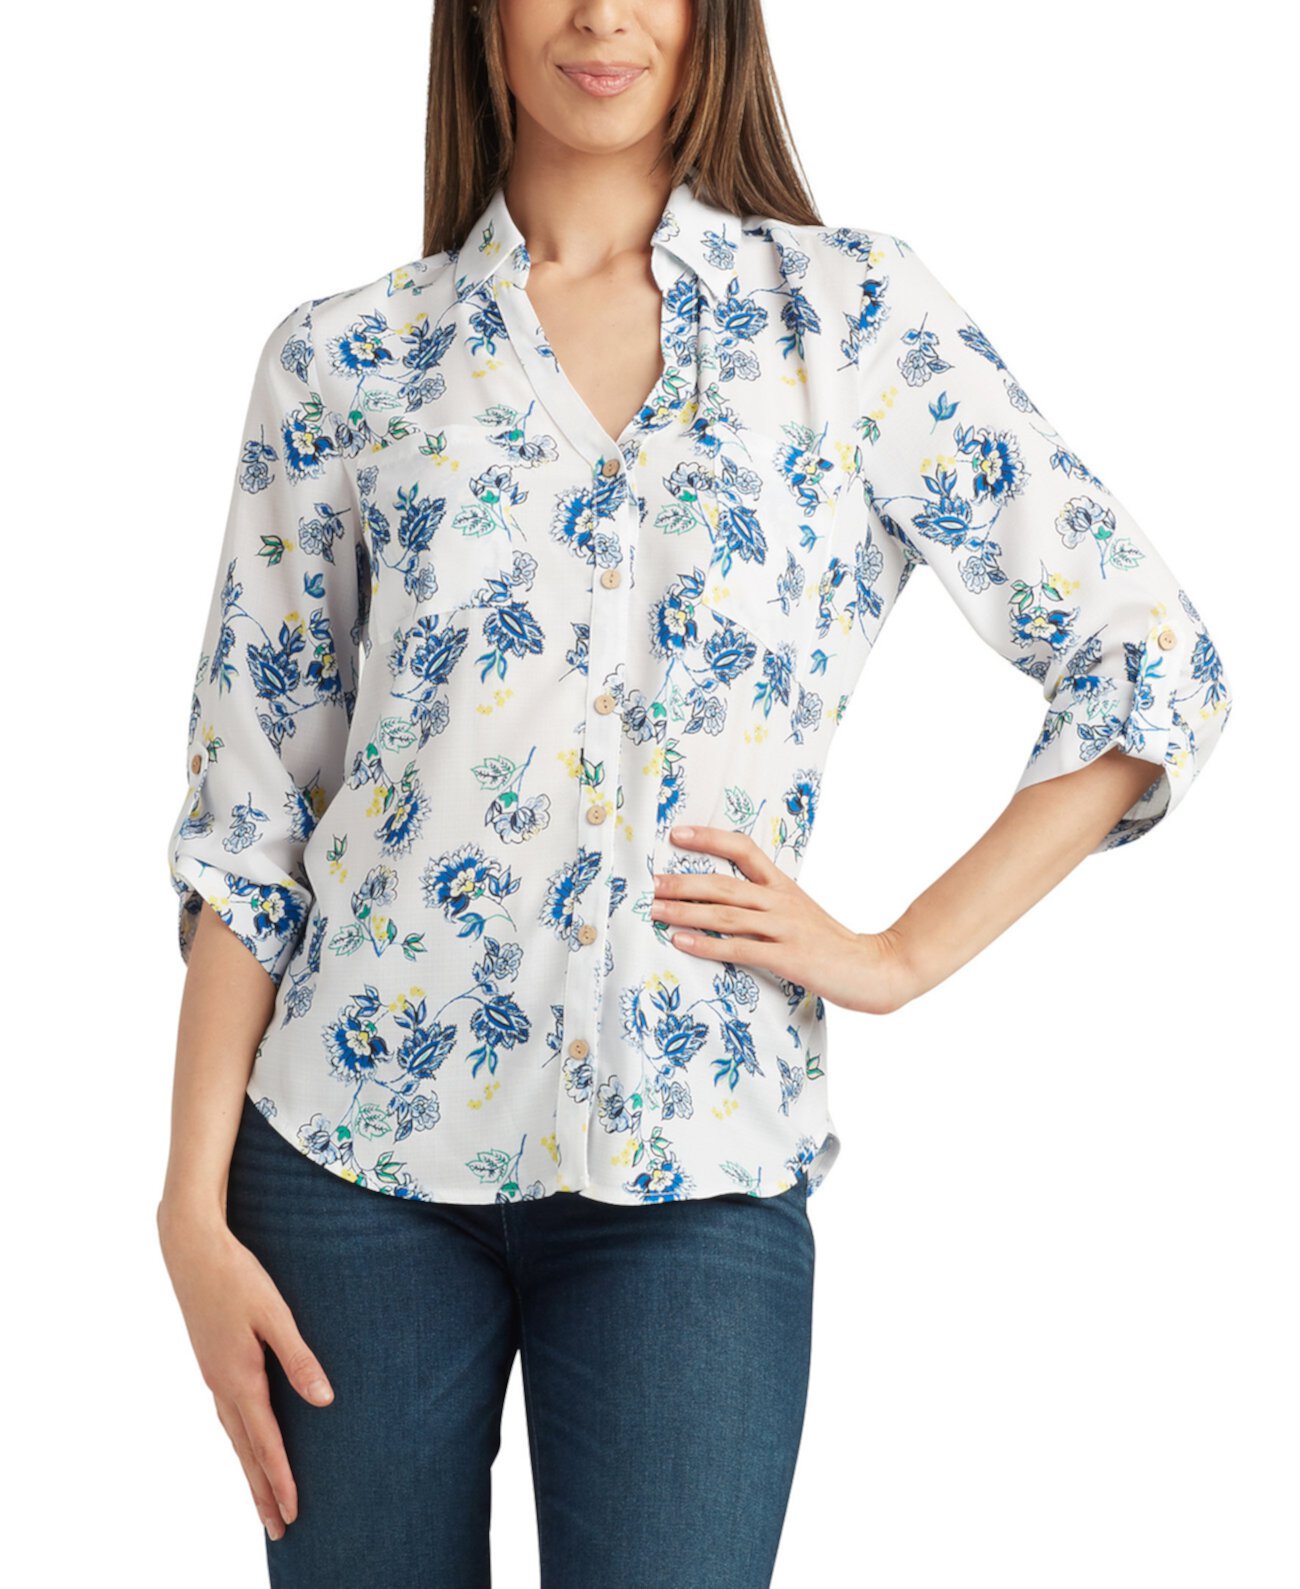 Juniors' Printed Roll-Tab Button-Front Shirt BCX